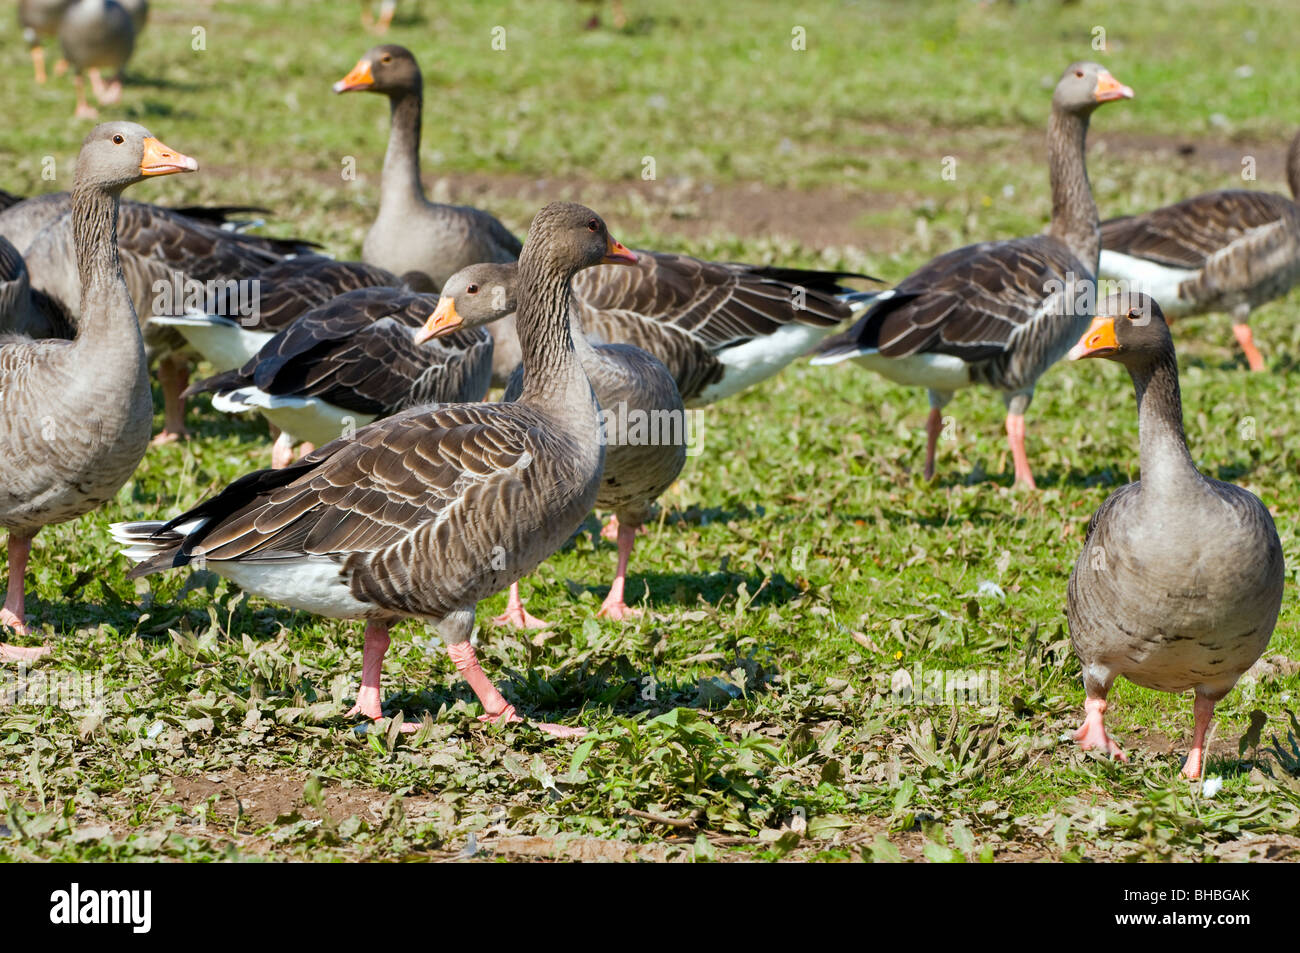 Gaggle, or flock, of greylag geese in grassy field taken in Laide, Wester Ross, Scotland Stock Photo